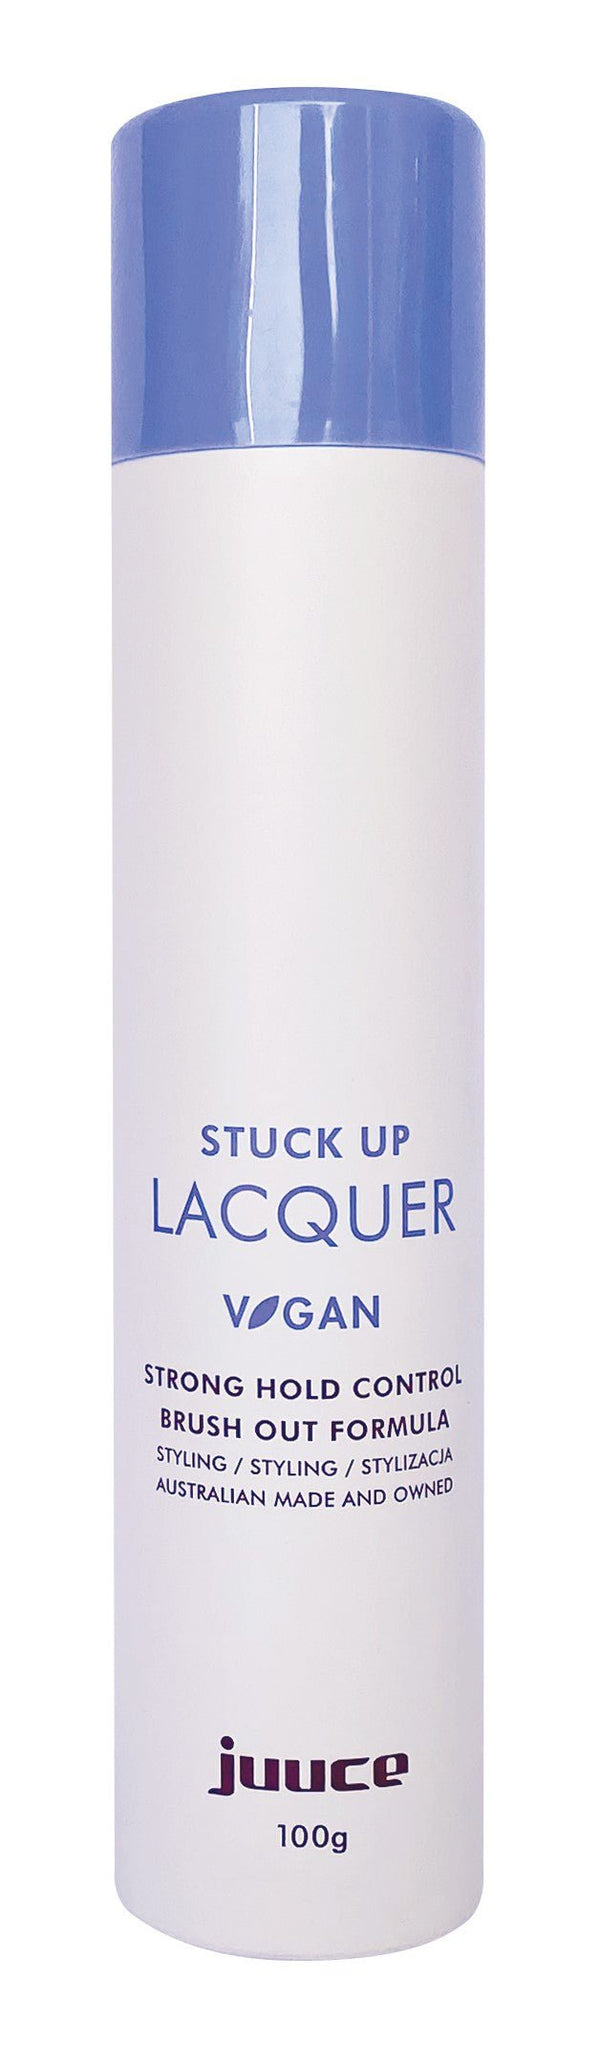 Juuce Stuck Up Hair Lacquer 100g - Salon Style